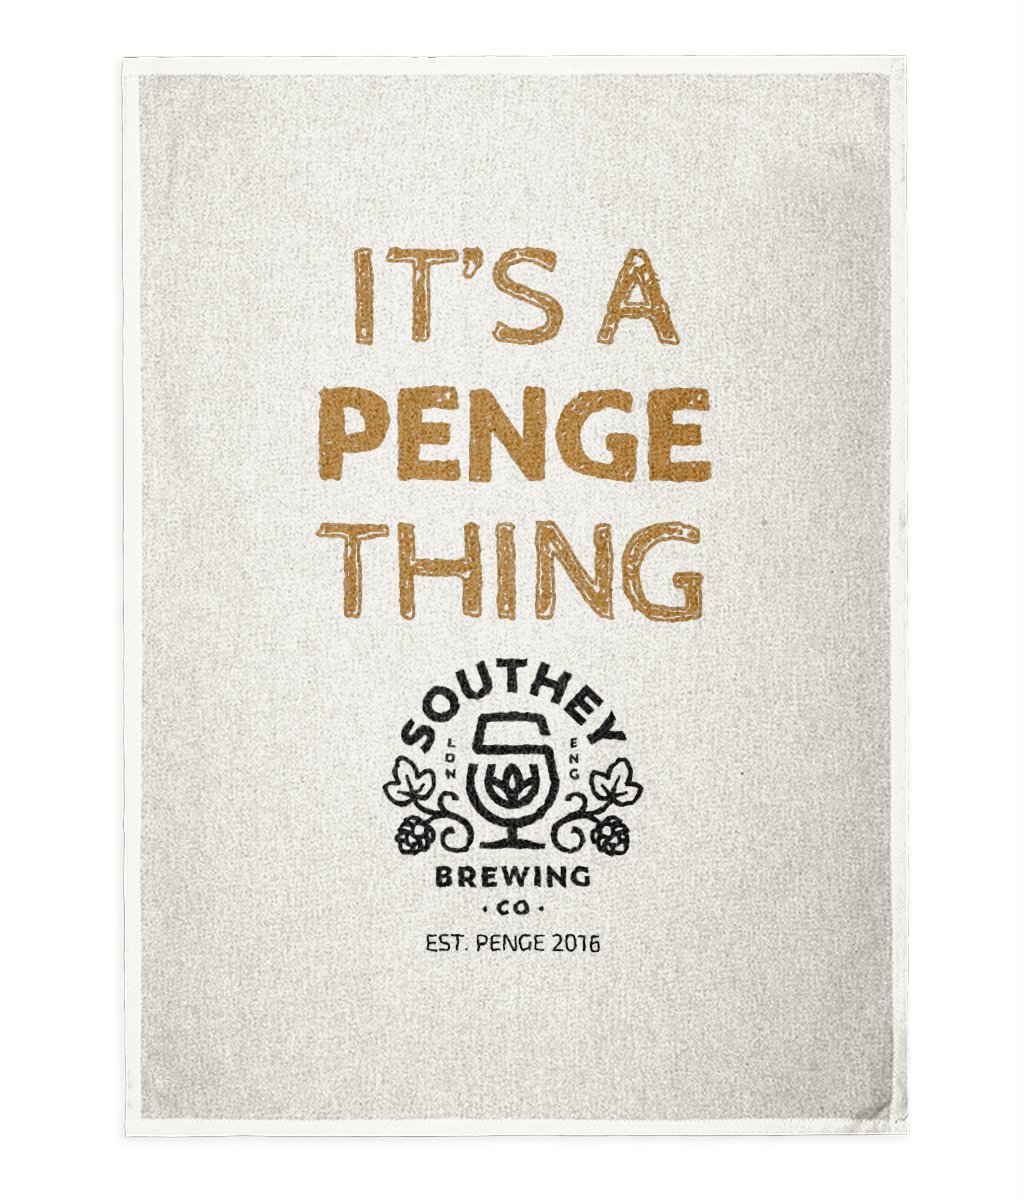 'It's a Penge thing' Tea Towel - Southey Brewery Co.